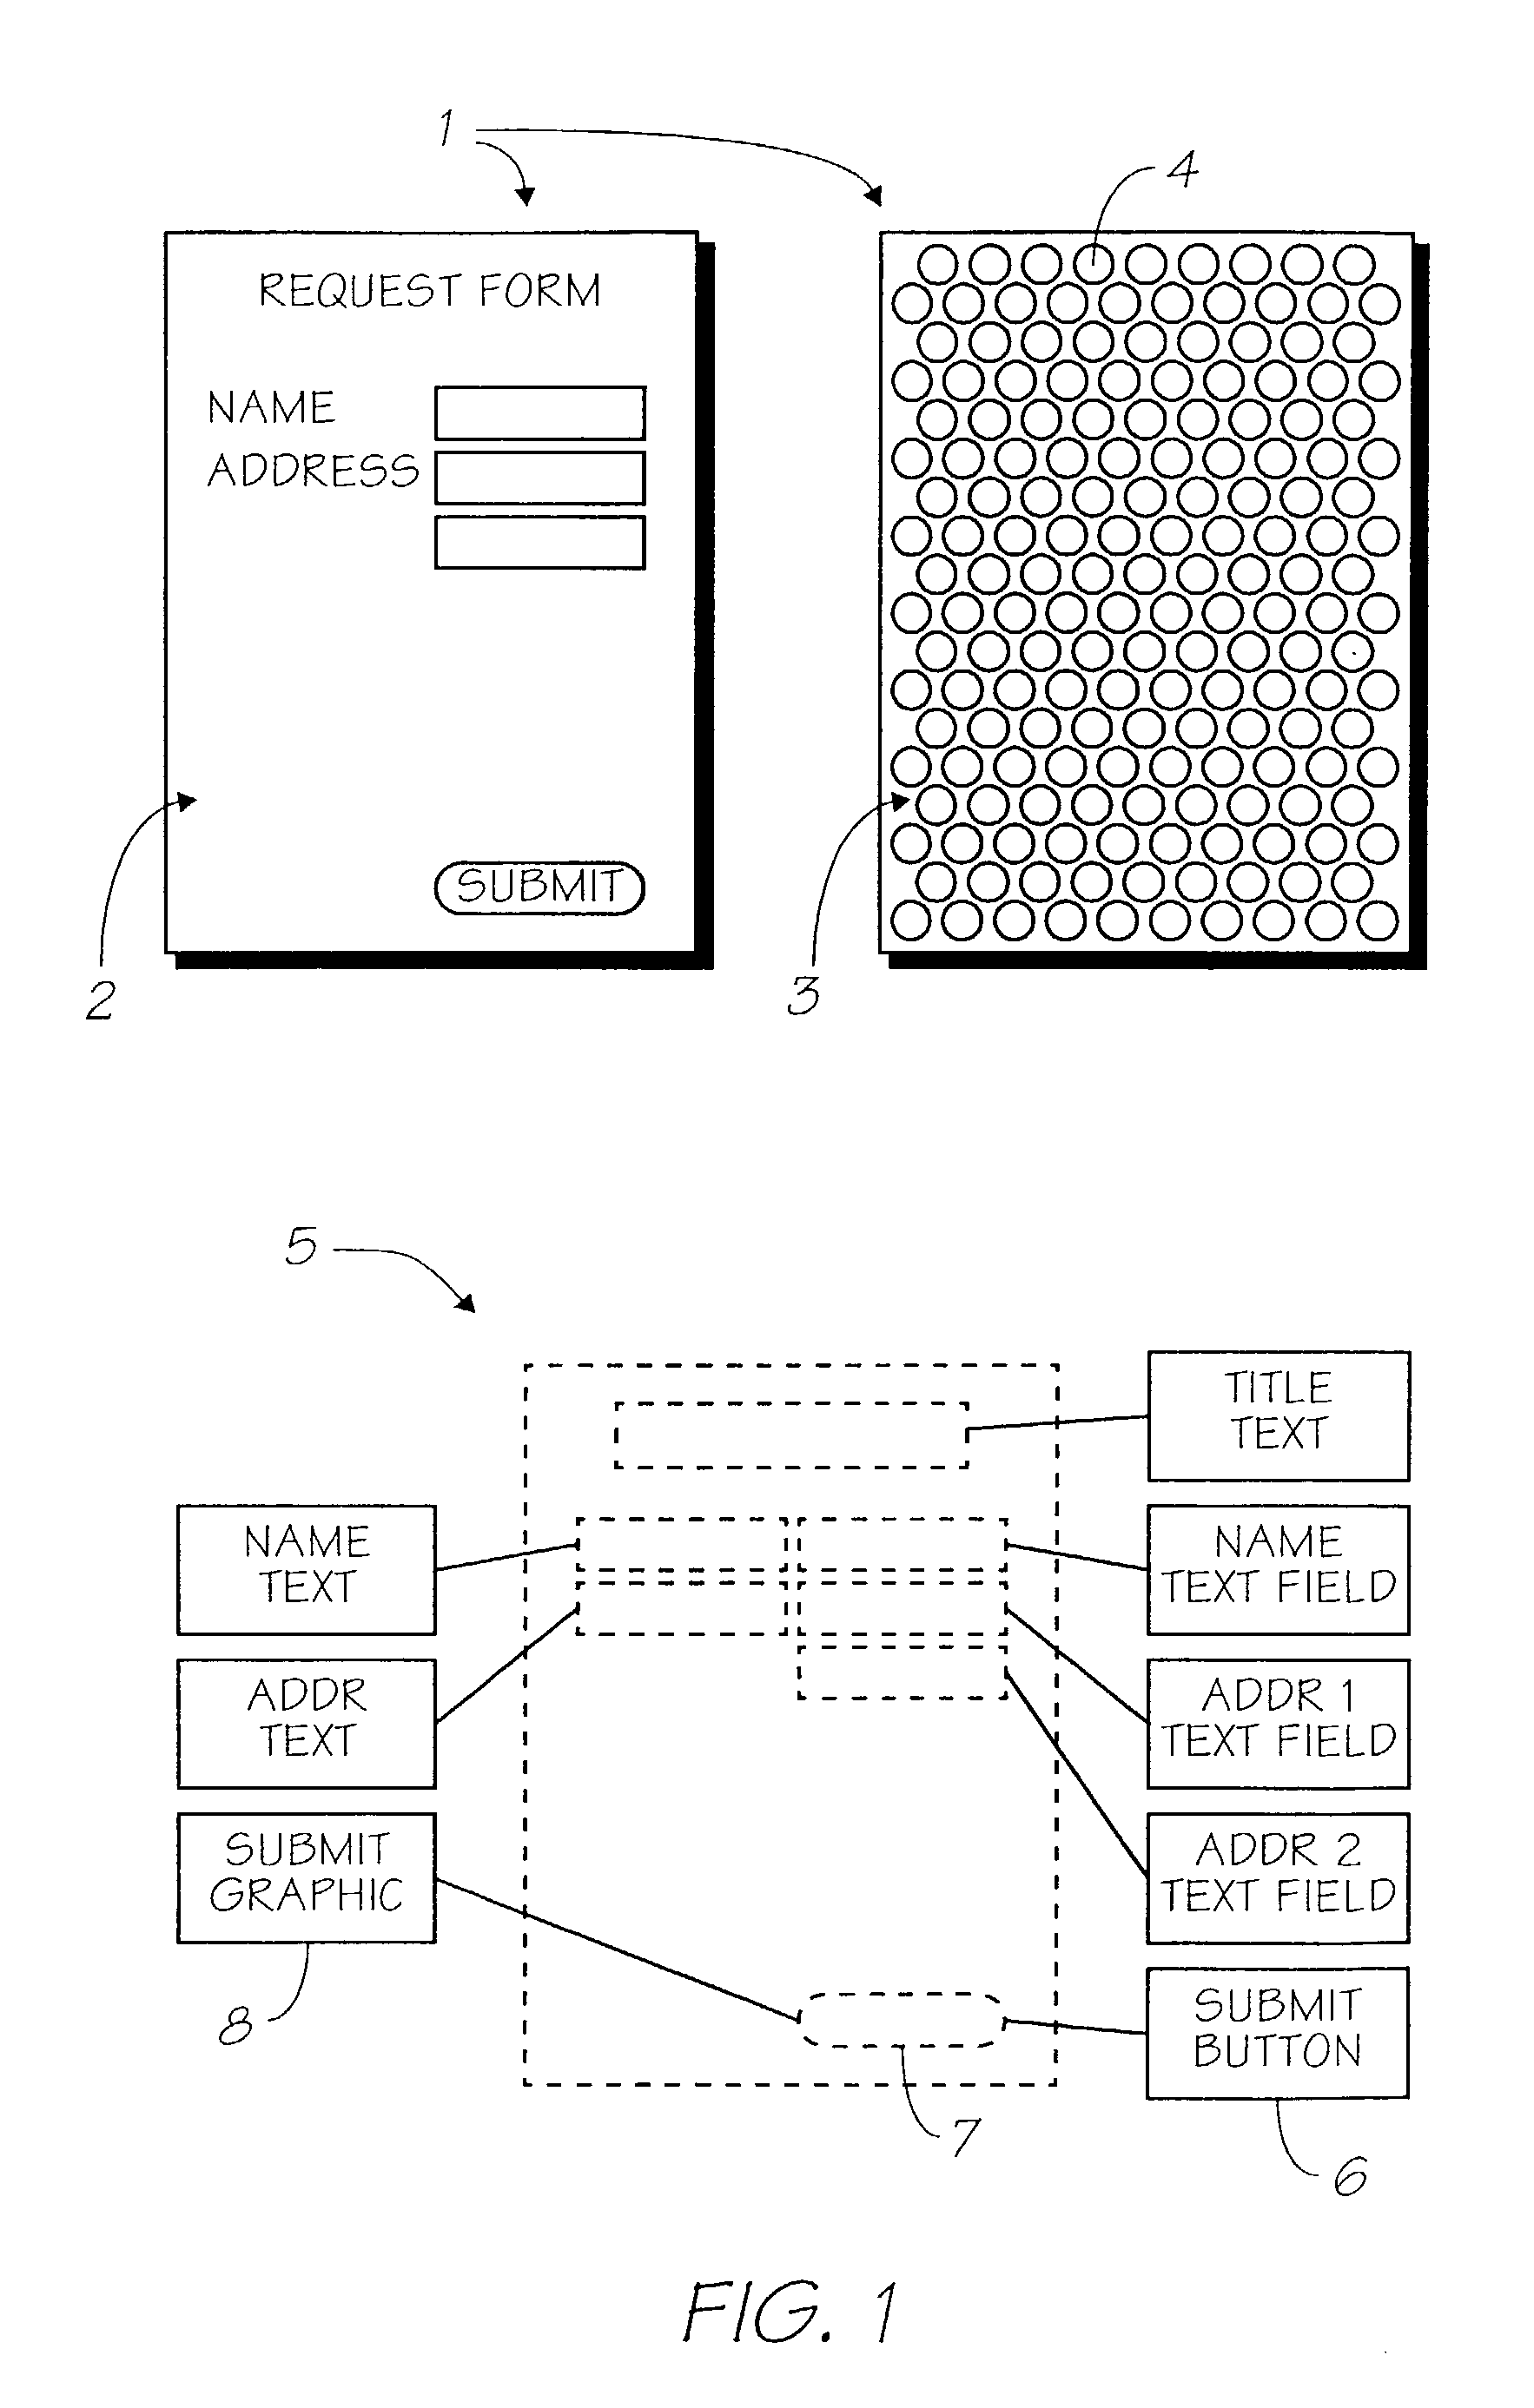 Handwritten text capture via interface surface having coded marks